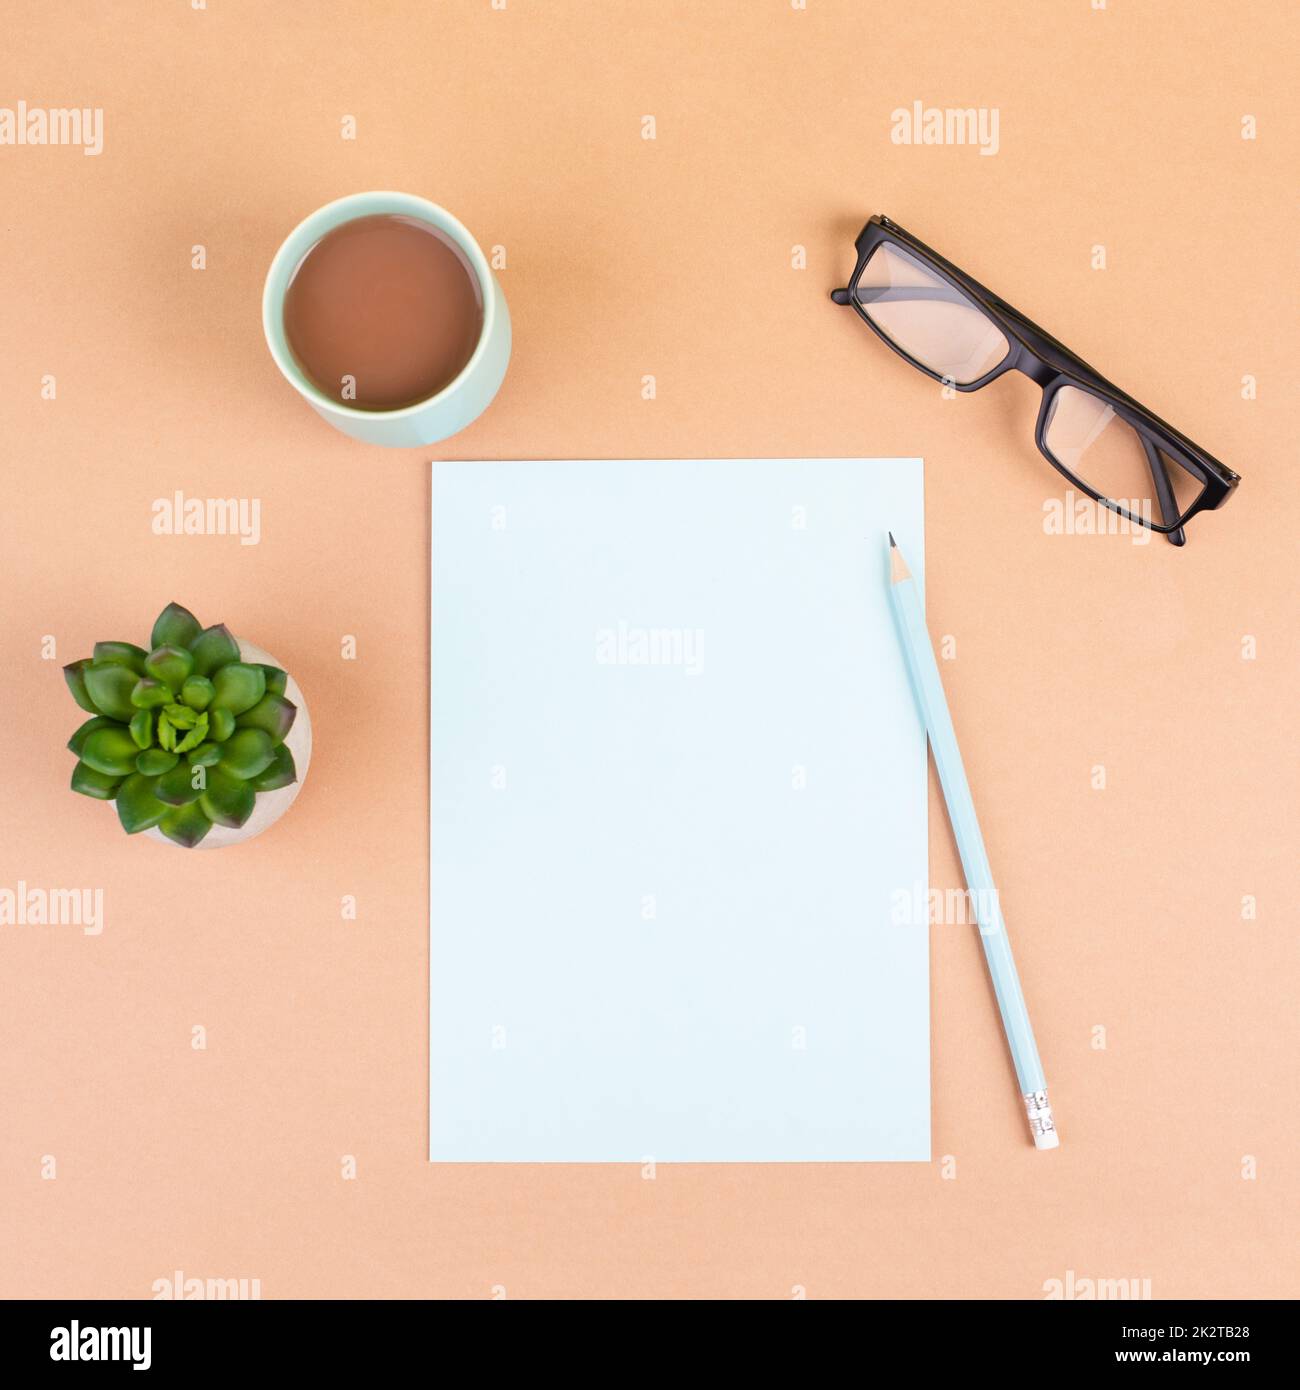 Empty paper with a pen, cup of coffee, eyeglasses and a cactus, brainstorming for new ideas, writing a message, taking a break, home office desk Stock Photo